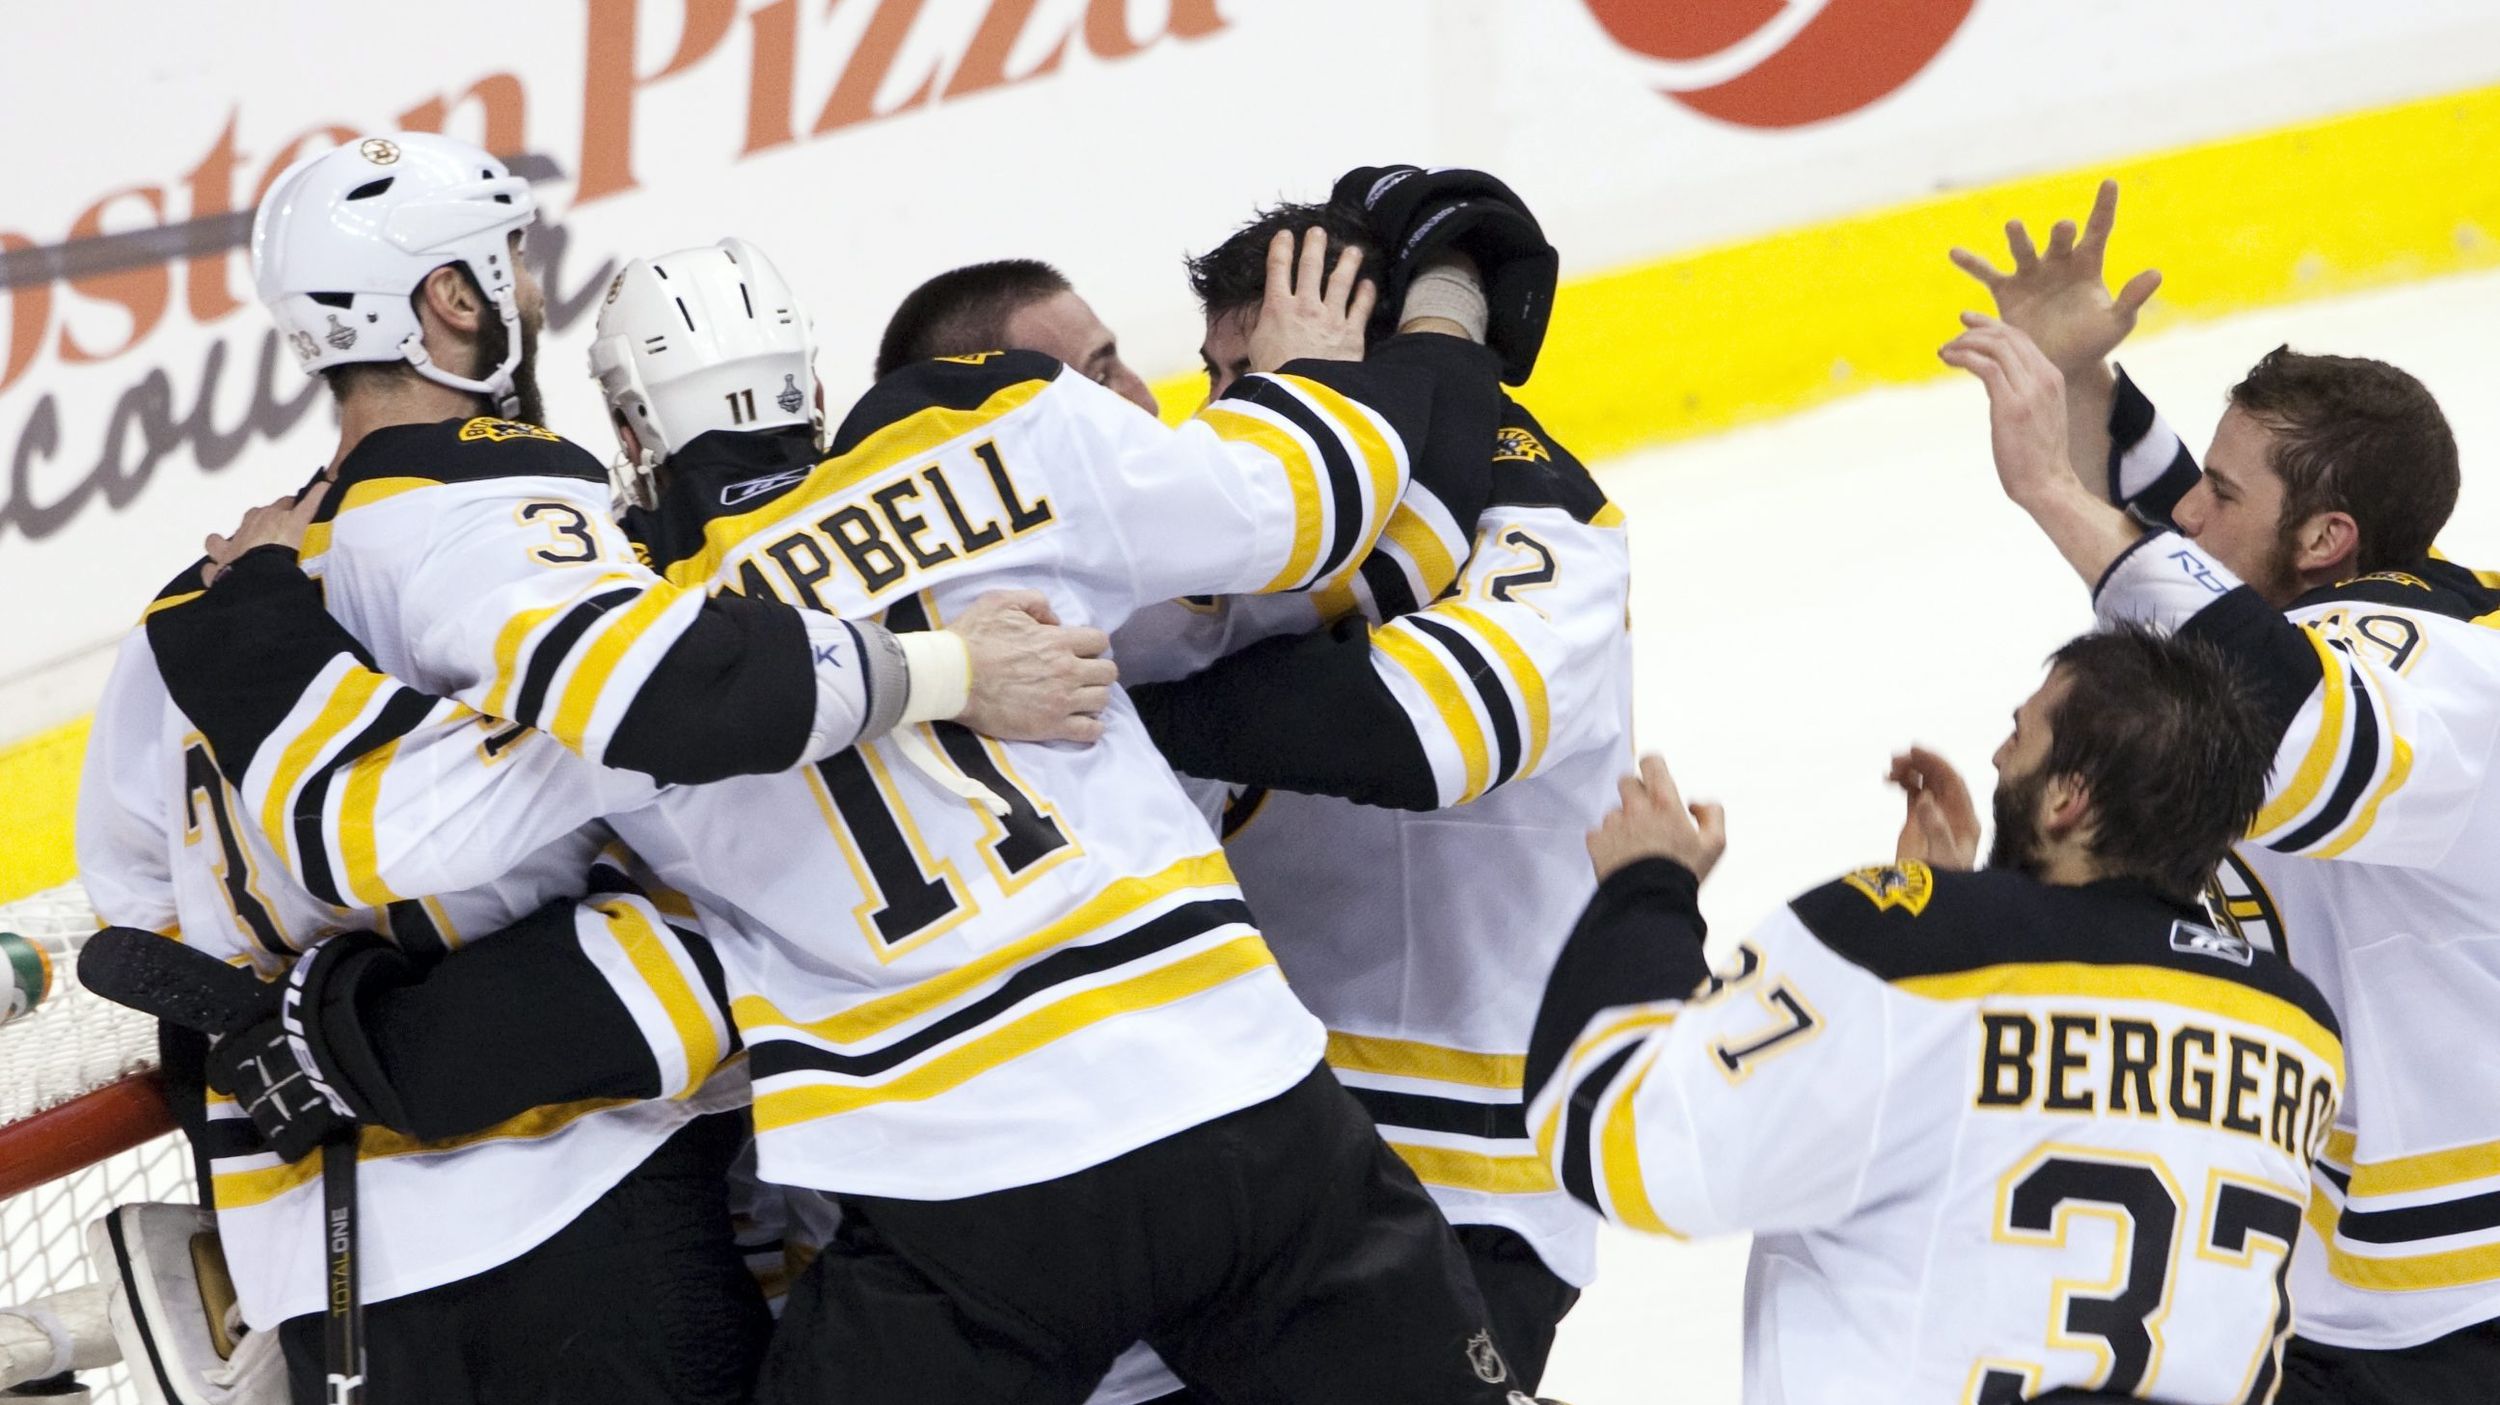 Poll: Who will win the 2011 Stanley Cup finals - the Boston Bruins